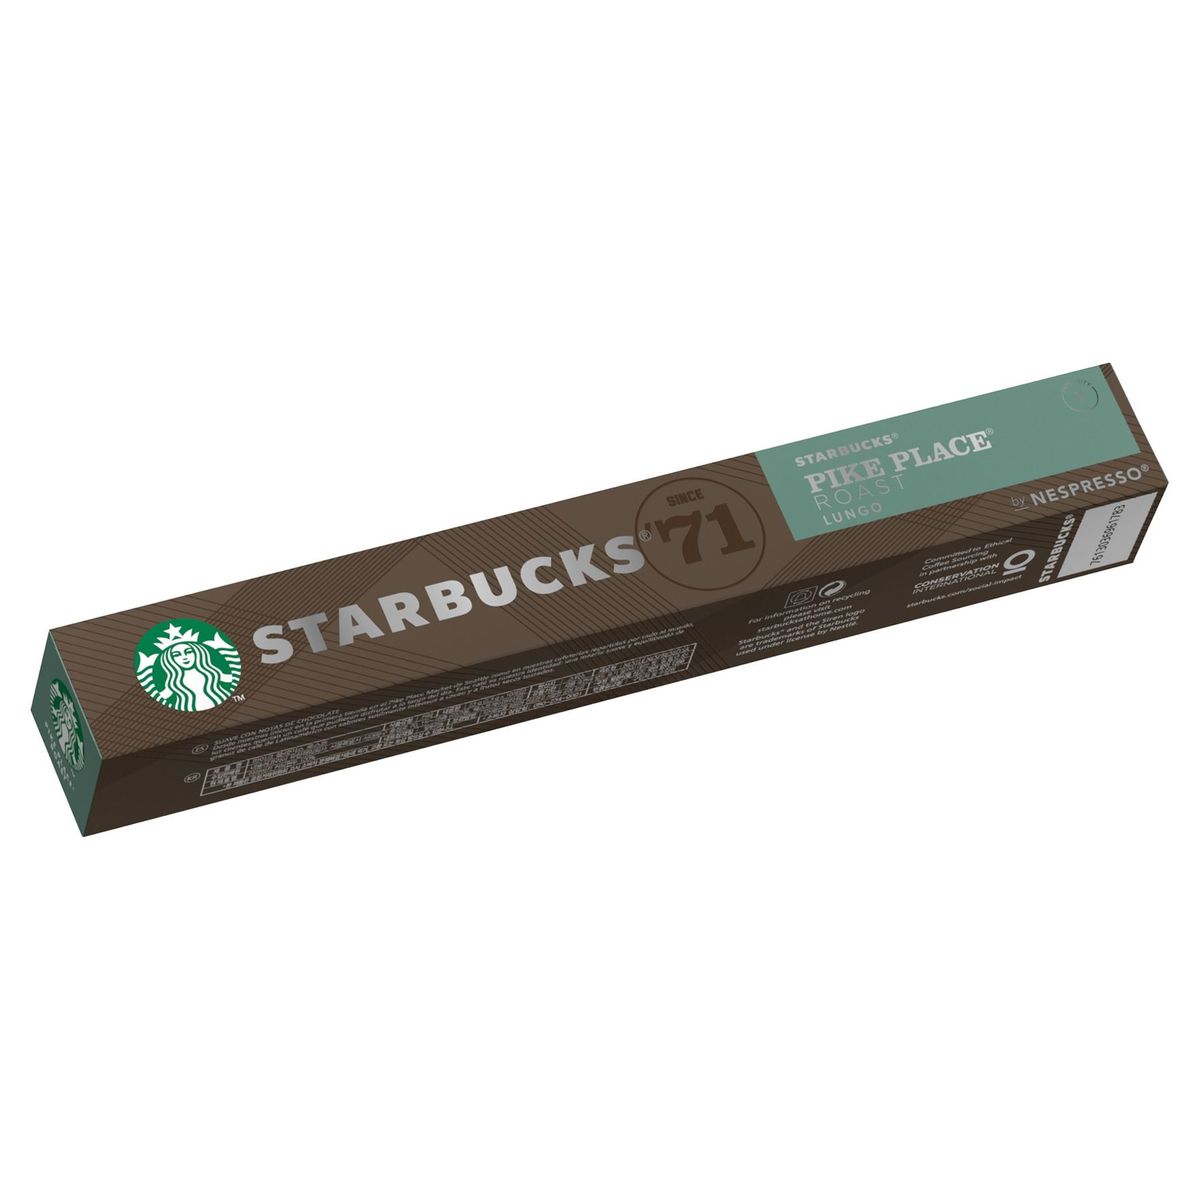 Koffie STARBUCKS by NESPRESSO Pike Place Roast 10 capsules